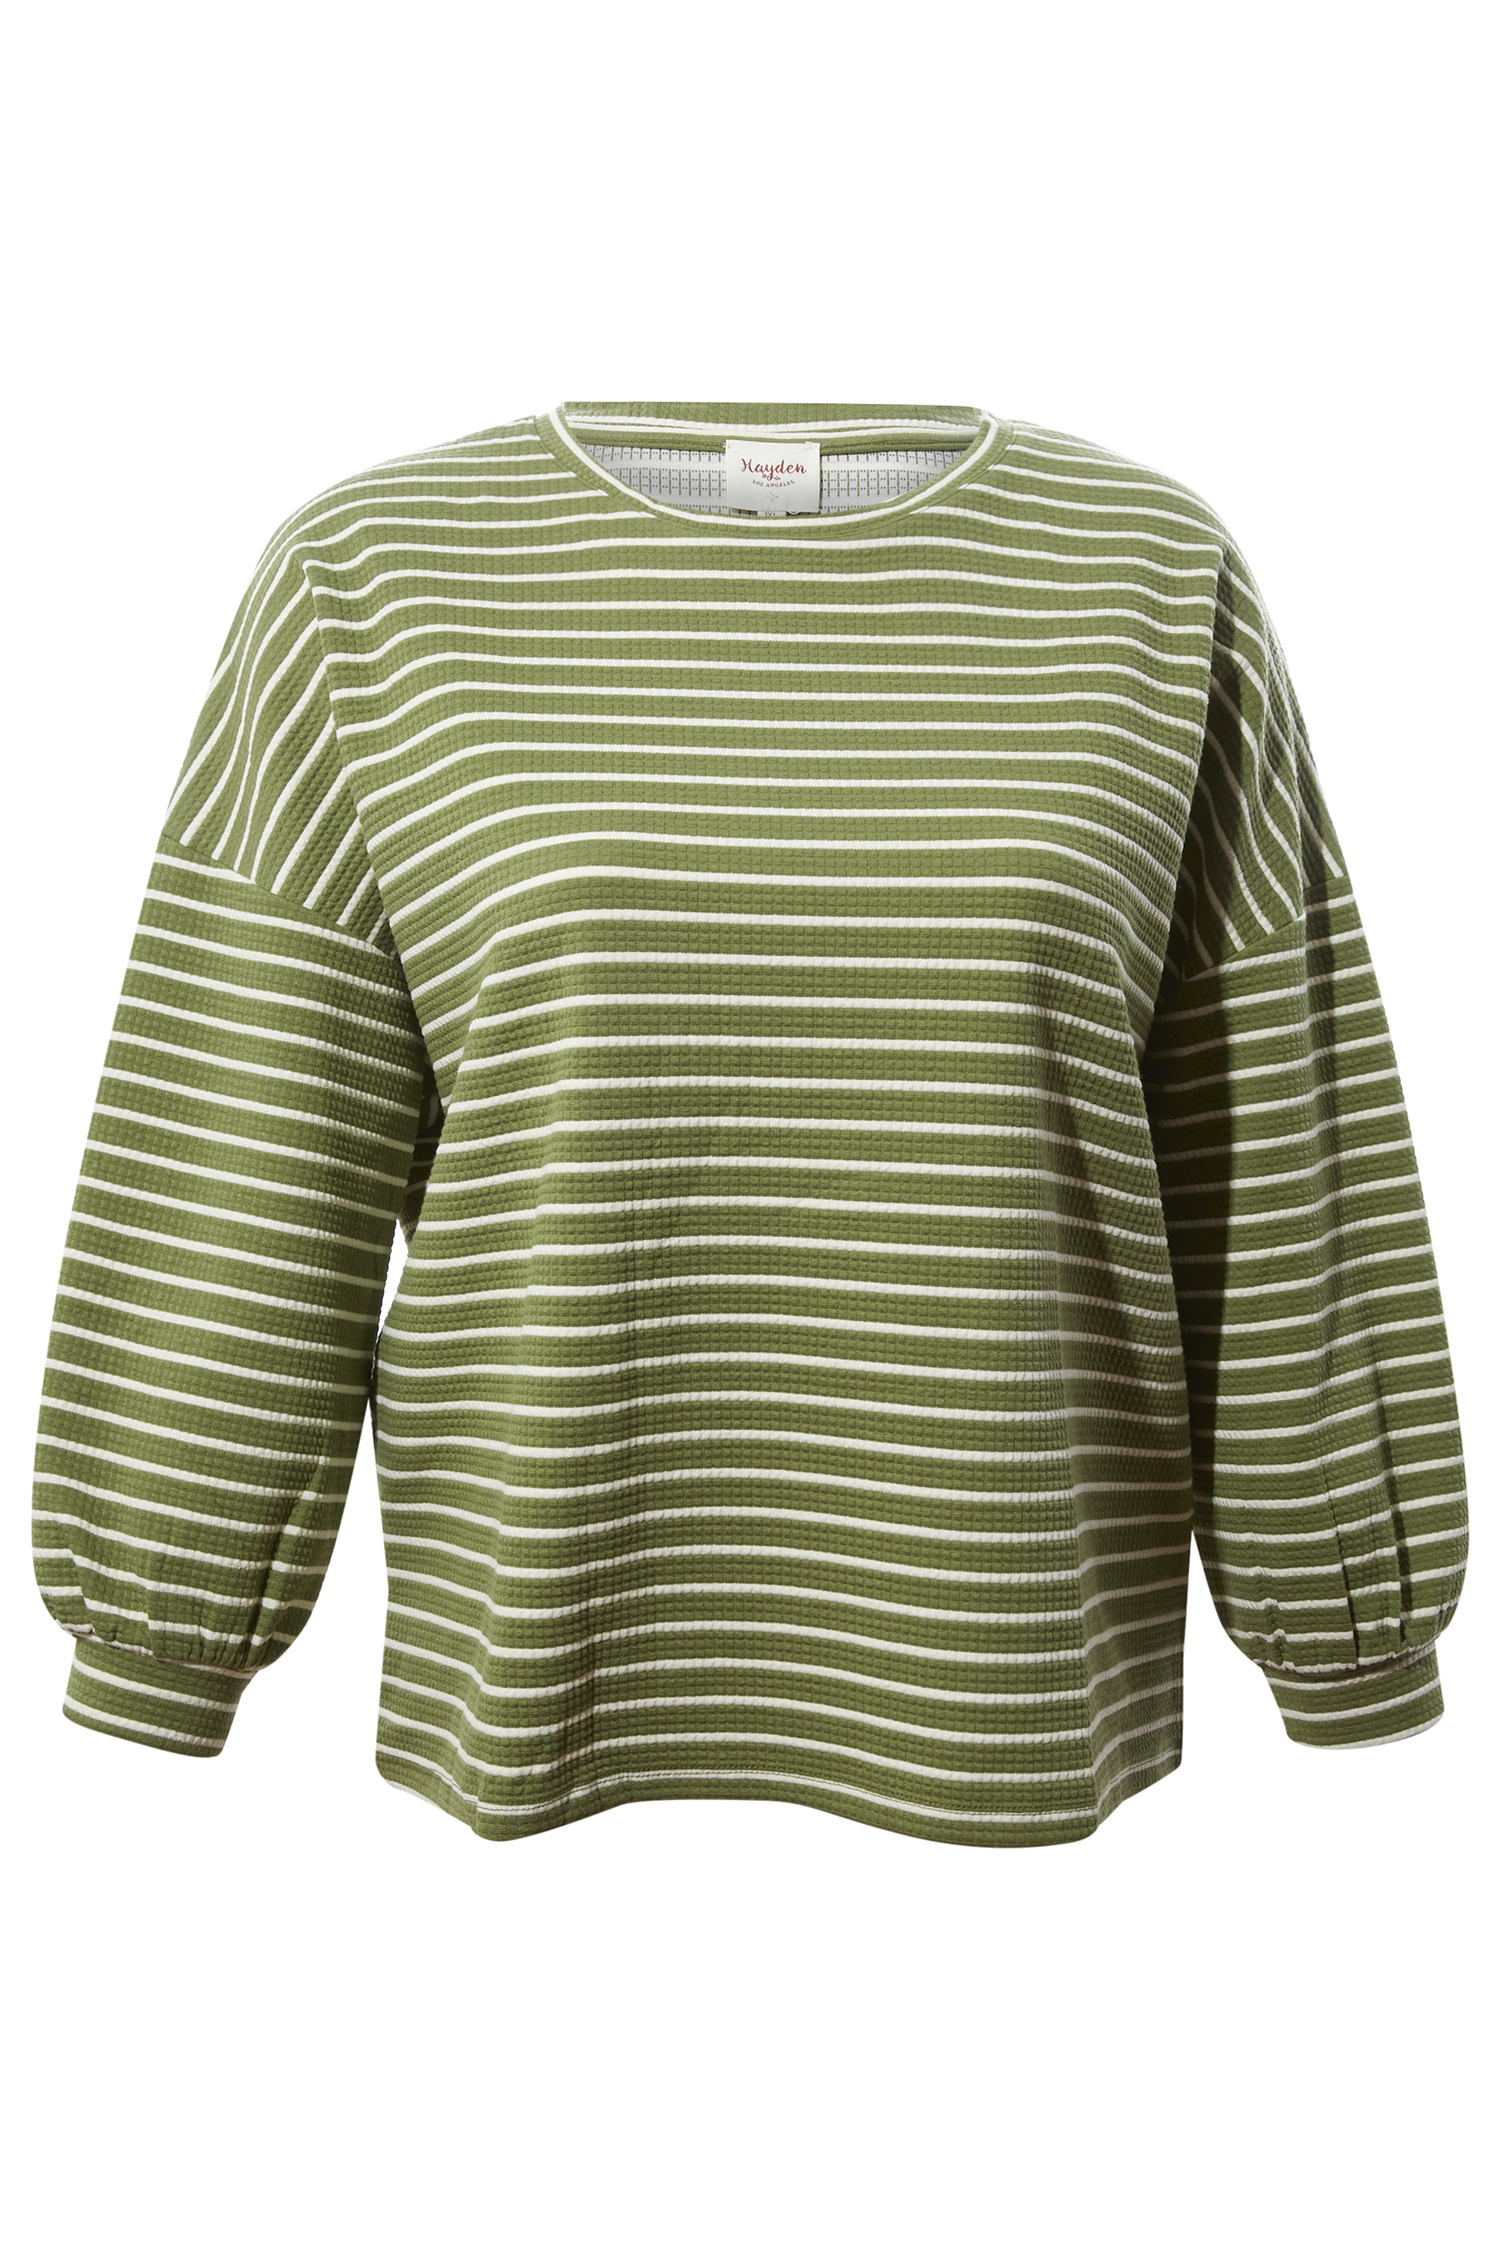 Long Sleeve Striped T-Shirt in Sage - 3X | DAILYLOOK 1X